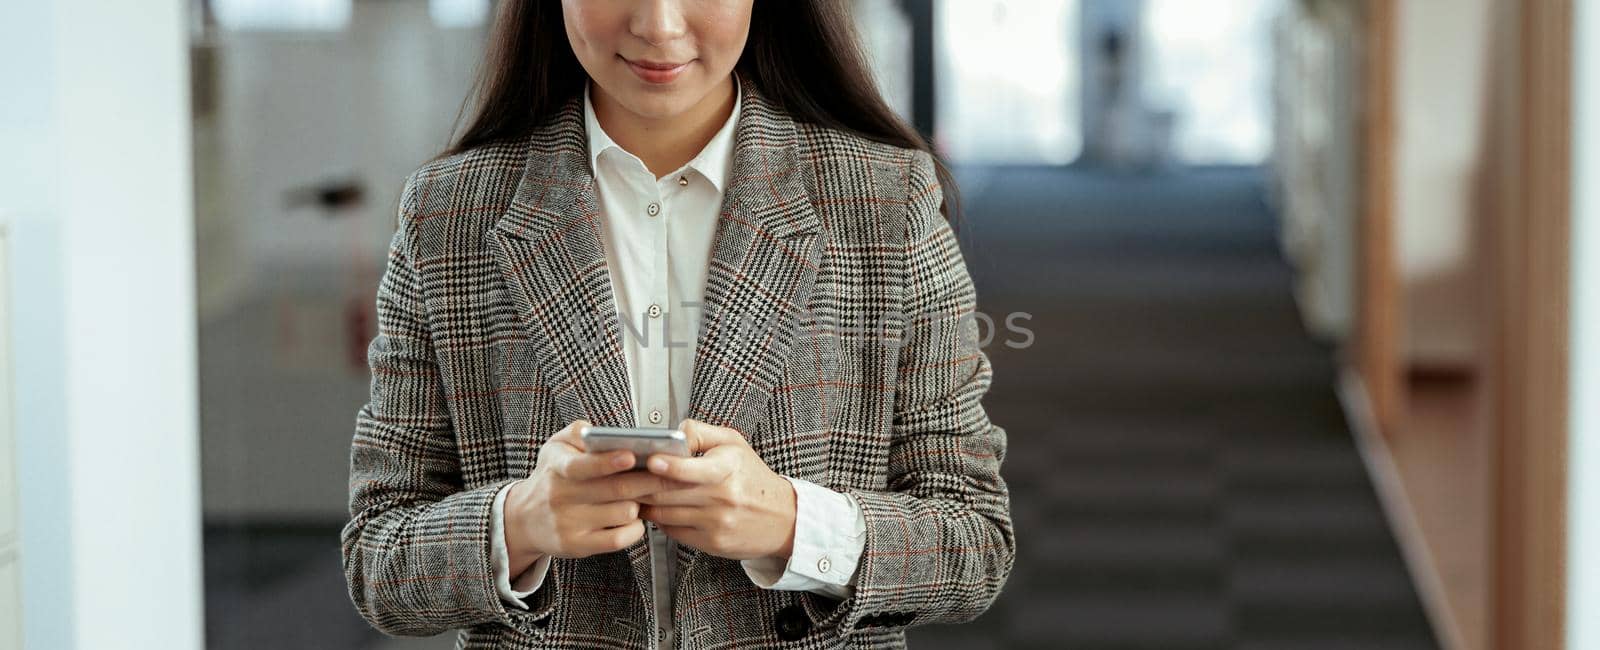 Smiling asian business woman is working correspondence on phone while standing in modern office